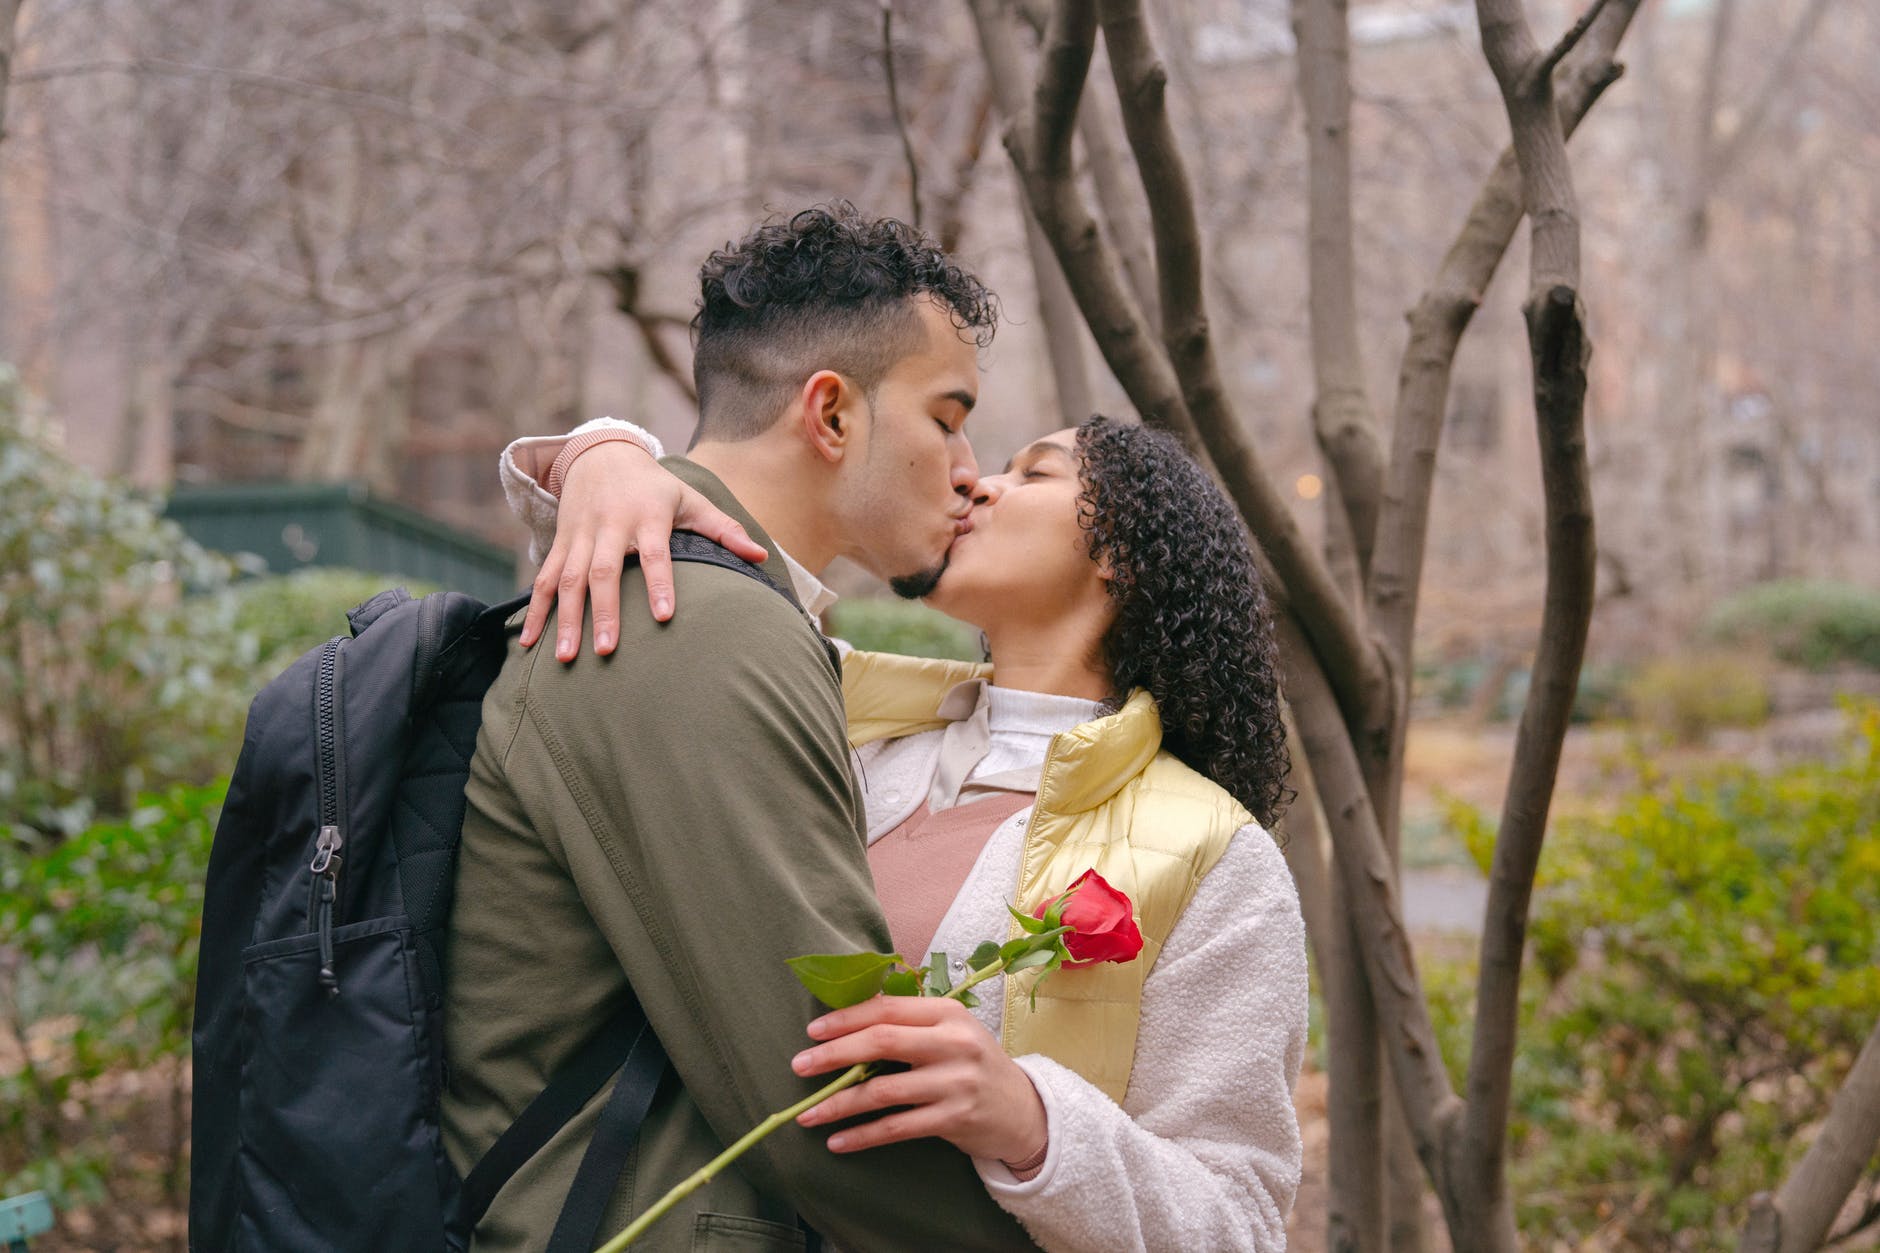 Two people kiss. The woman is holding a rose.